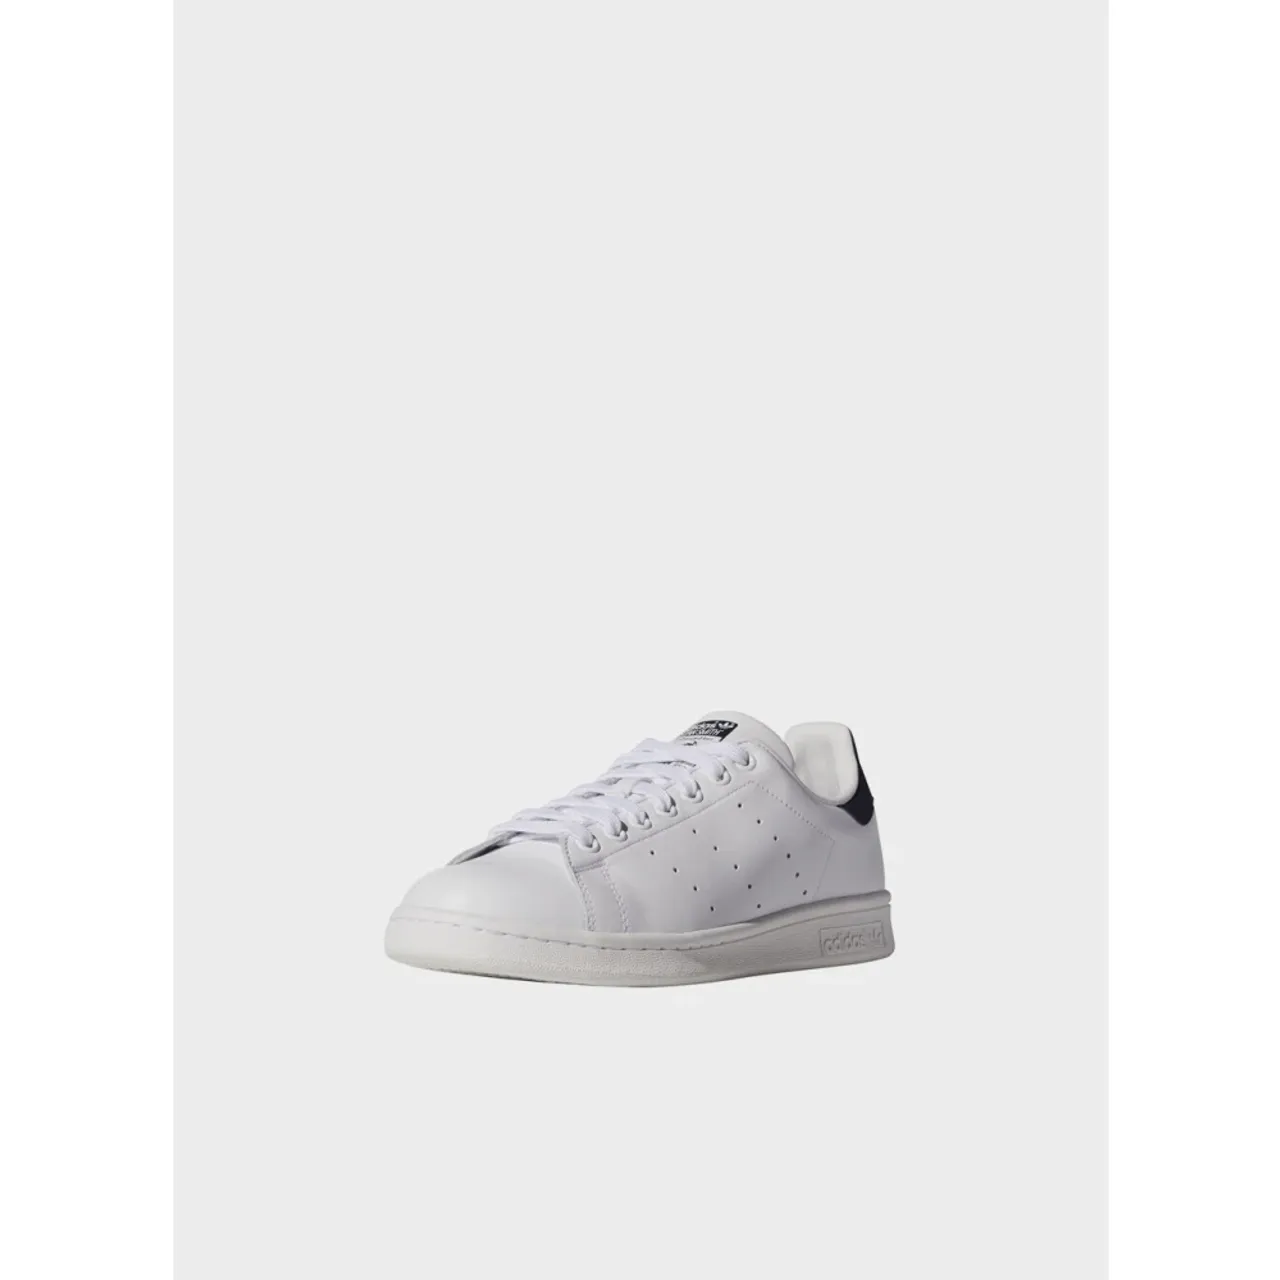 Adidas , Classic Stan Smith Leather Sneakers ,White male, Sizes: